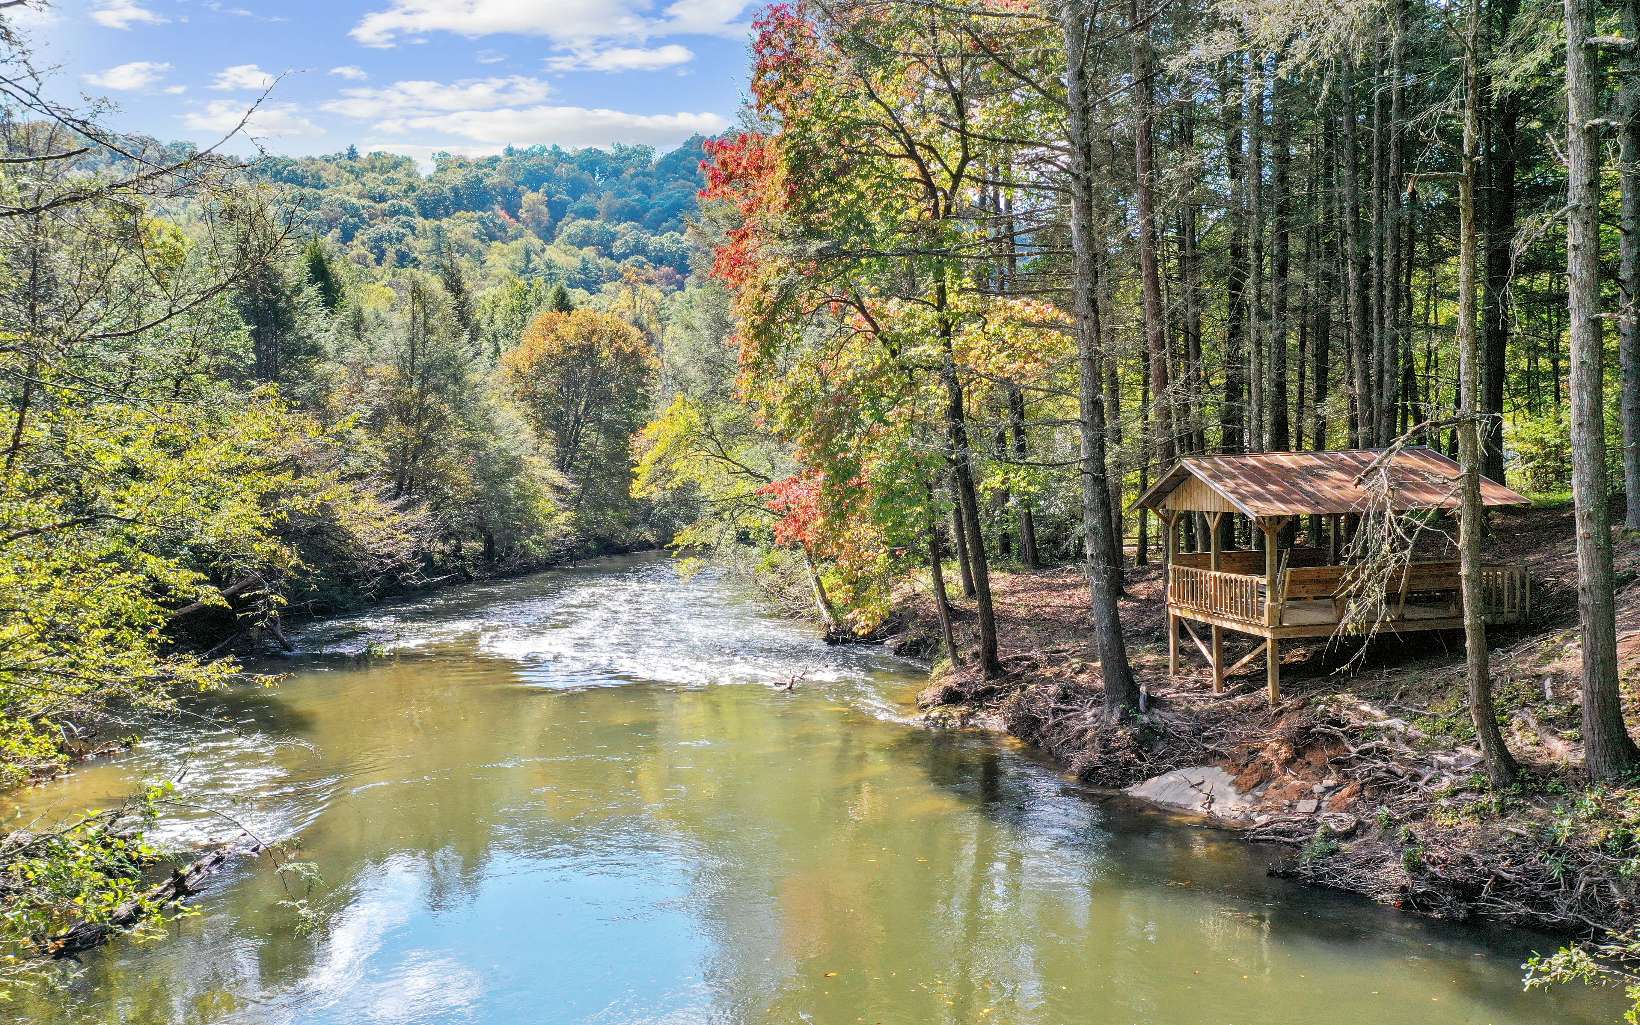 TOCCOA RIVER FRONTAGE!! 357.88+/- FEET ON RIVER & BLUE RIDGE CHATTAHOOCHEE NATIONAL FOREST ACROSS RIVER and one side of property line!!! 25+ acres W/Pavilion on Rivers edge. TRULY ONE OF A KIND DREAM PROPERTY!! GEM!.. Main Cabin 3/2, Spring house/Cottage 2/1 sitting at spring; apartment 1/1 above carport. Garages' & NEWLY installed generator for all homes. Pasture, Barns, sheds. Well at garage and barn! All homes, garages and Barns immaculate! Easy access to Barn w/stalls and equestrian interior! FAMILY RETREAT! INVESTMENT PROPERTY! HUNTING/TROUT FISHING PROPERTY! OR FAMILY FARM & BRING THE HORSES!!!(ONLY 15 to 20 MINUTES FROM BLUE RIDGE, SUCHES, BLAIRSVILLE AND ELLIJAY)(Blue Ridge/Dial area property but has a Suches 911 address)